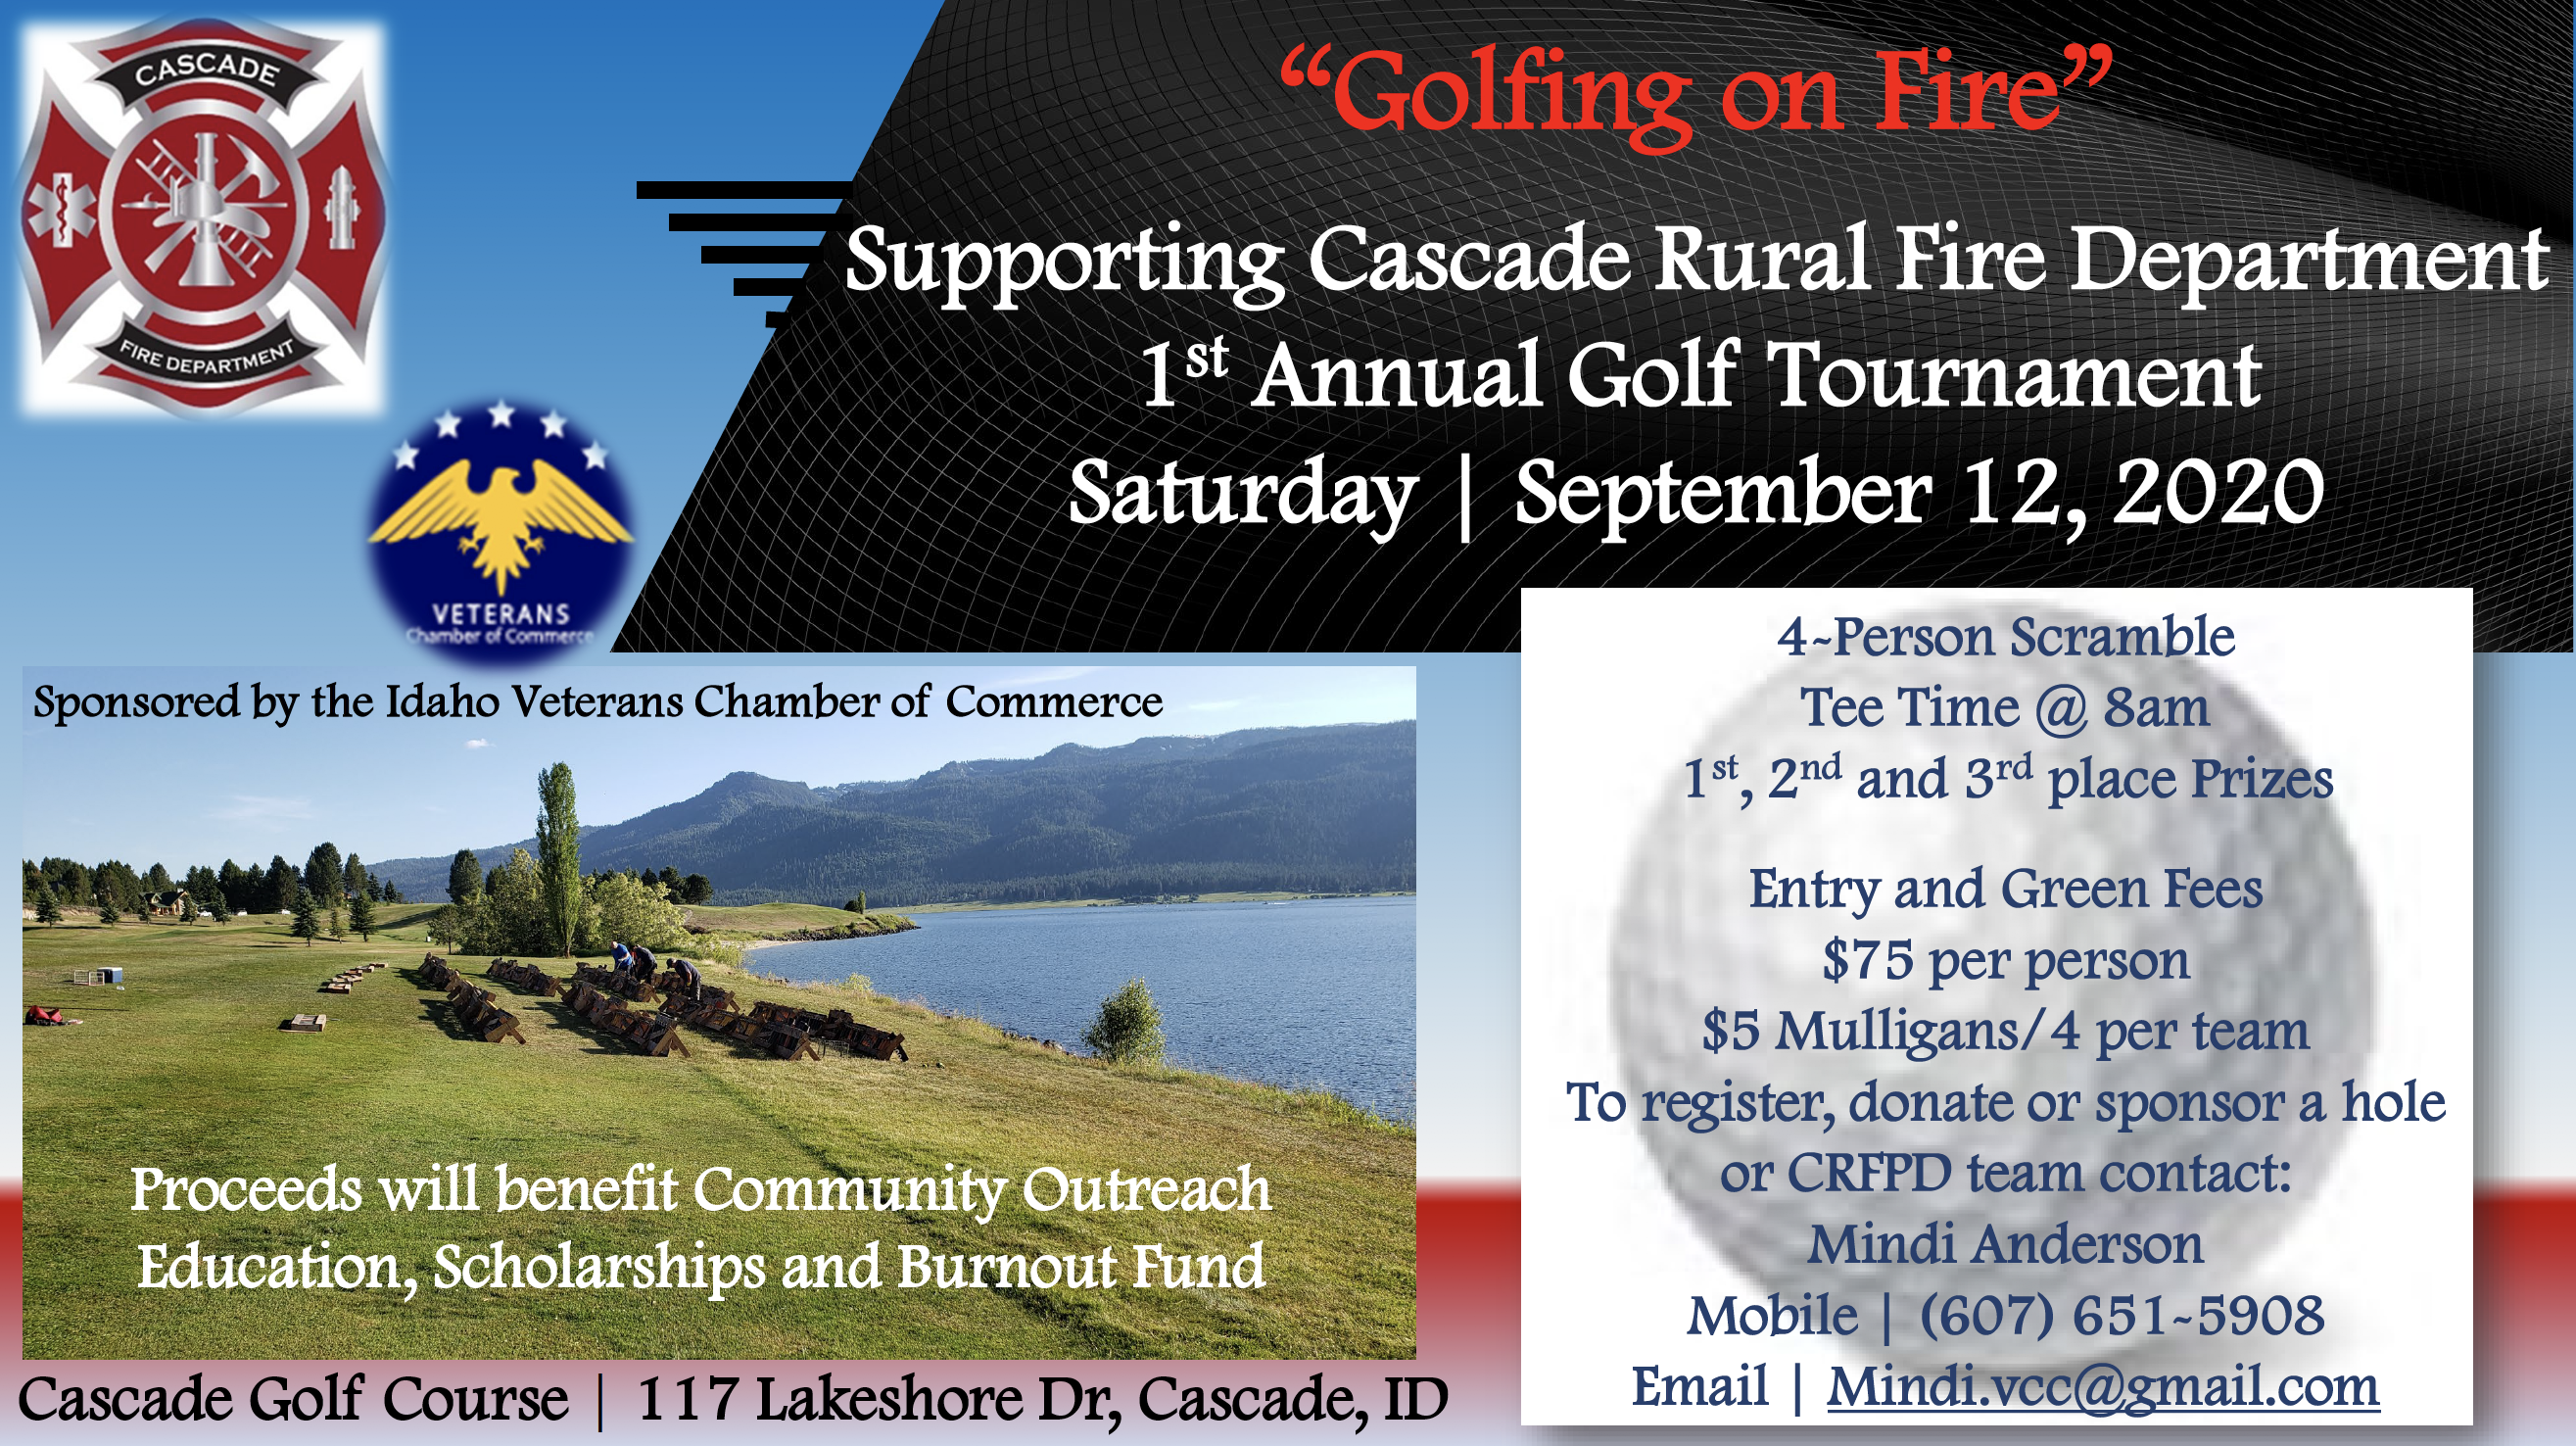 Past Event: Golfing on Fire